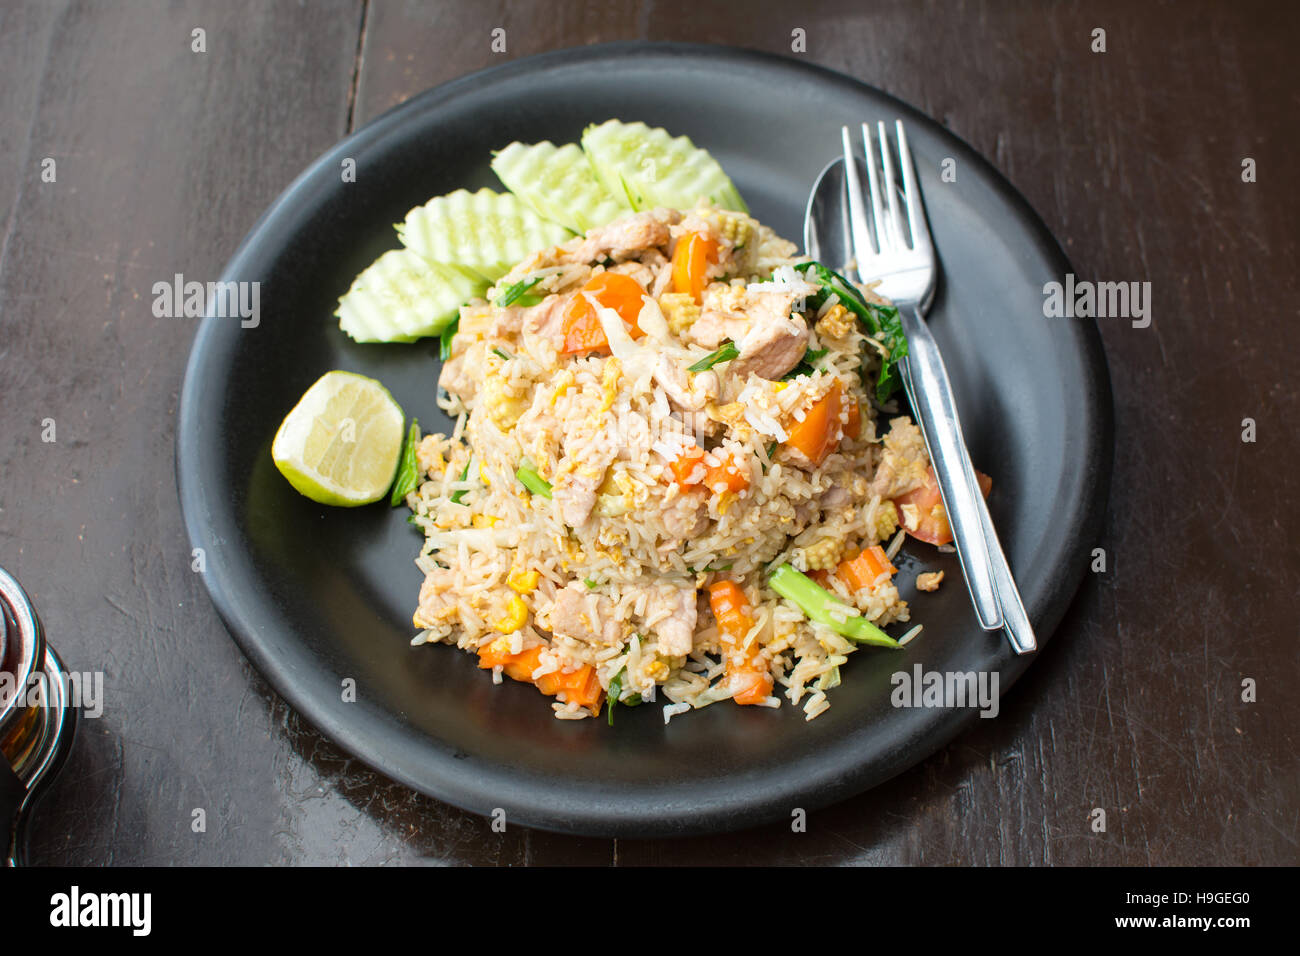 Fried rice with meat and vegetables served on a plate Stock Photo